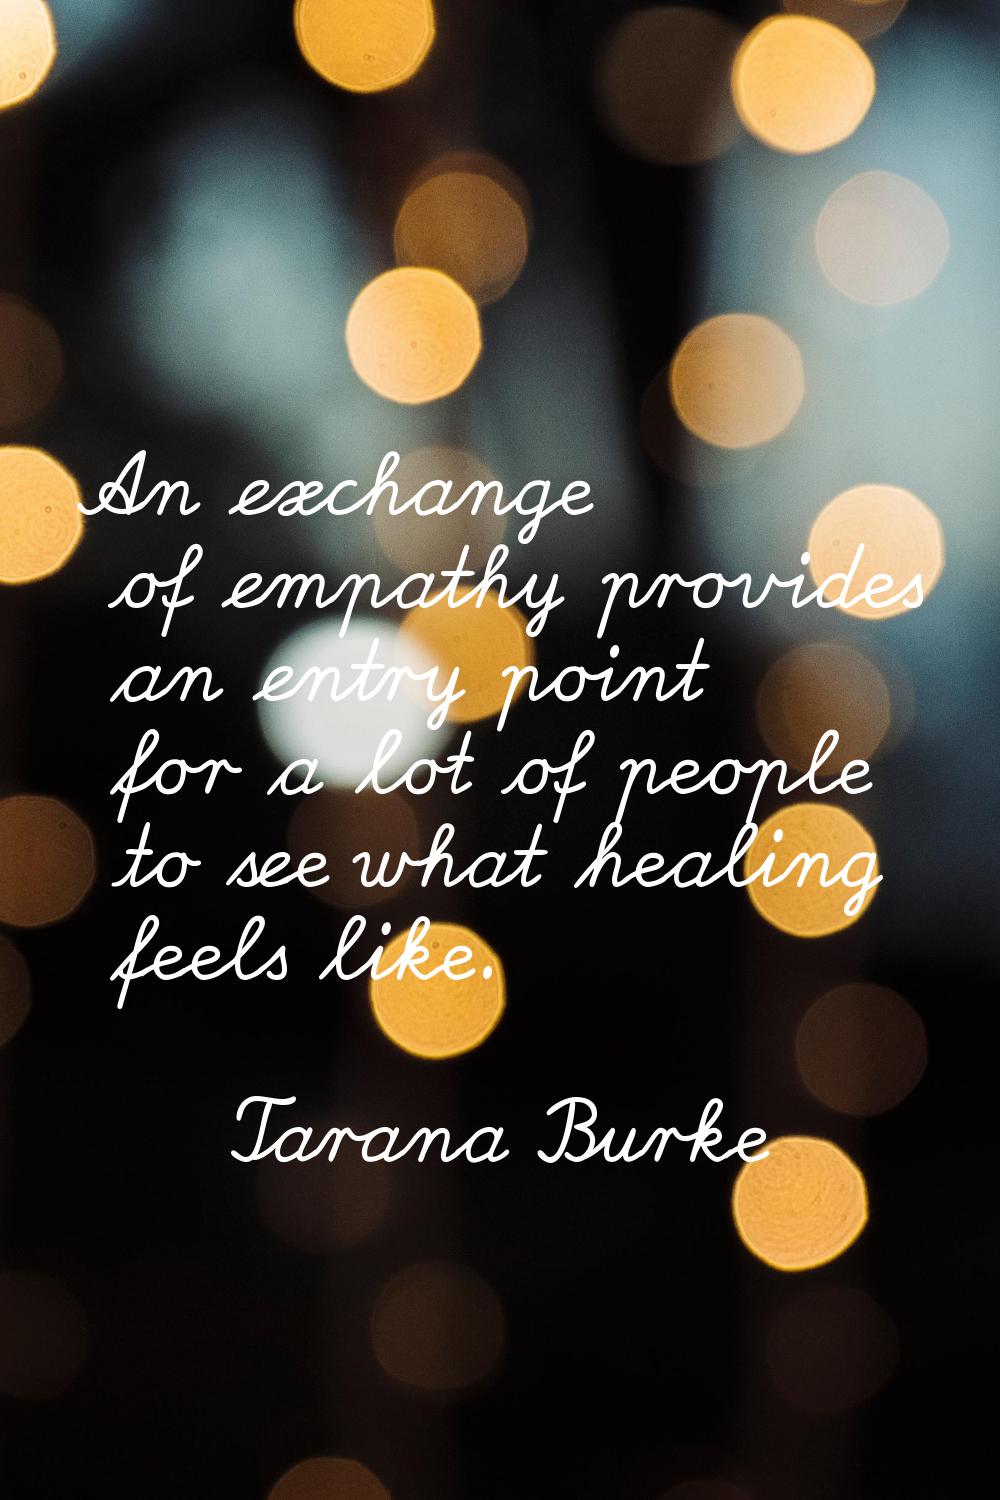 An exchange of empathy provides an entry point for a lot of people to see what healing feels like.